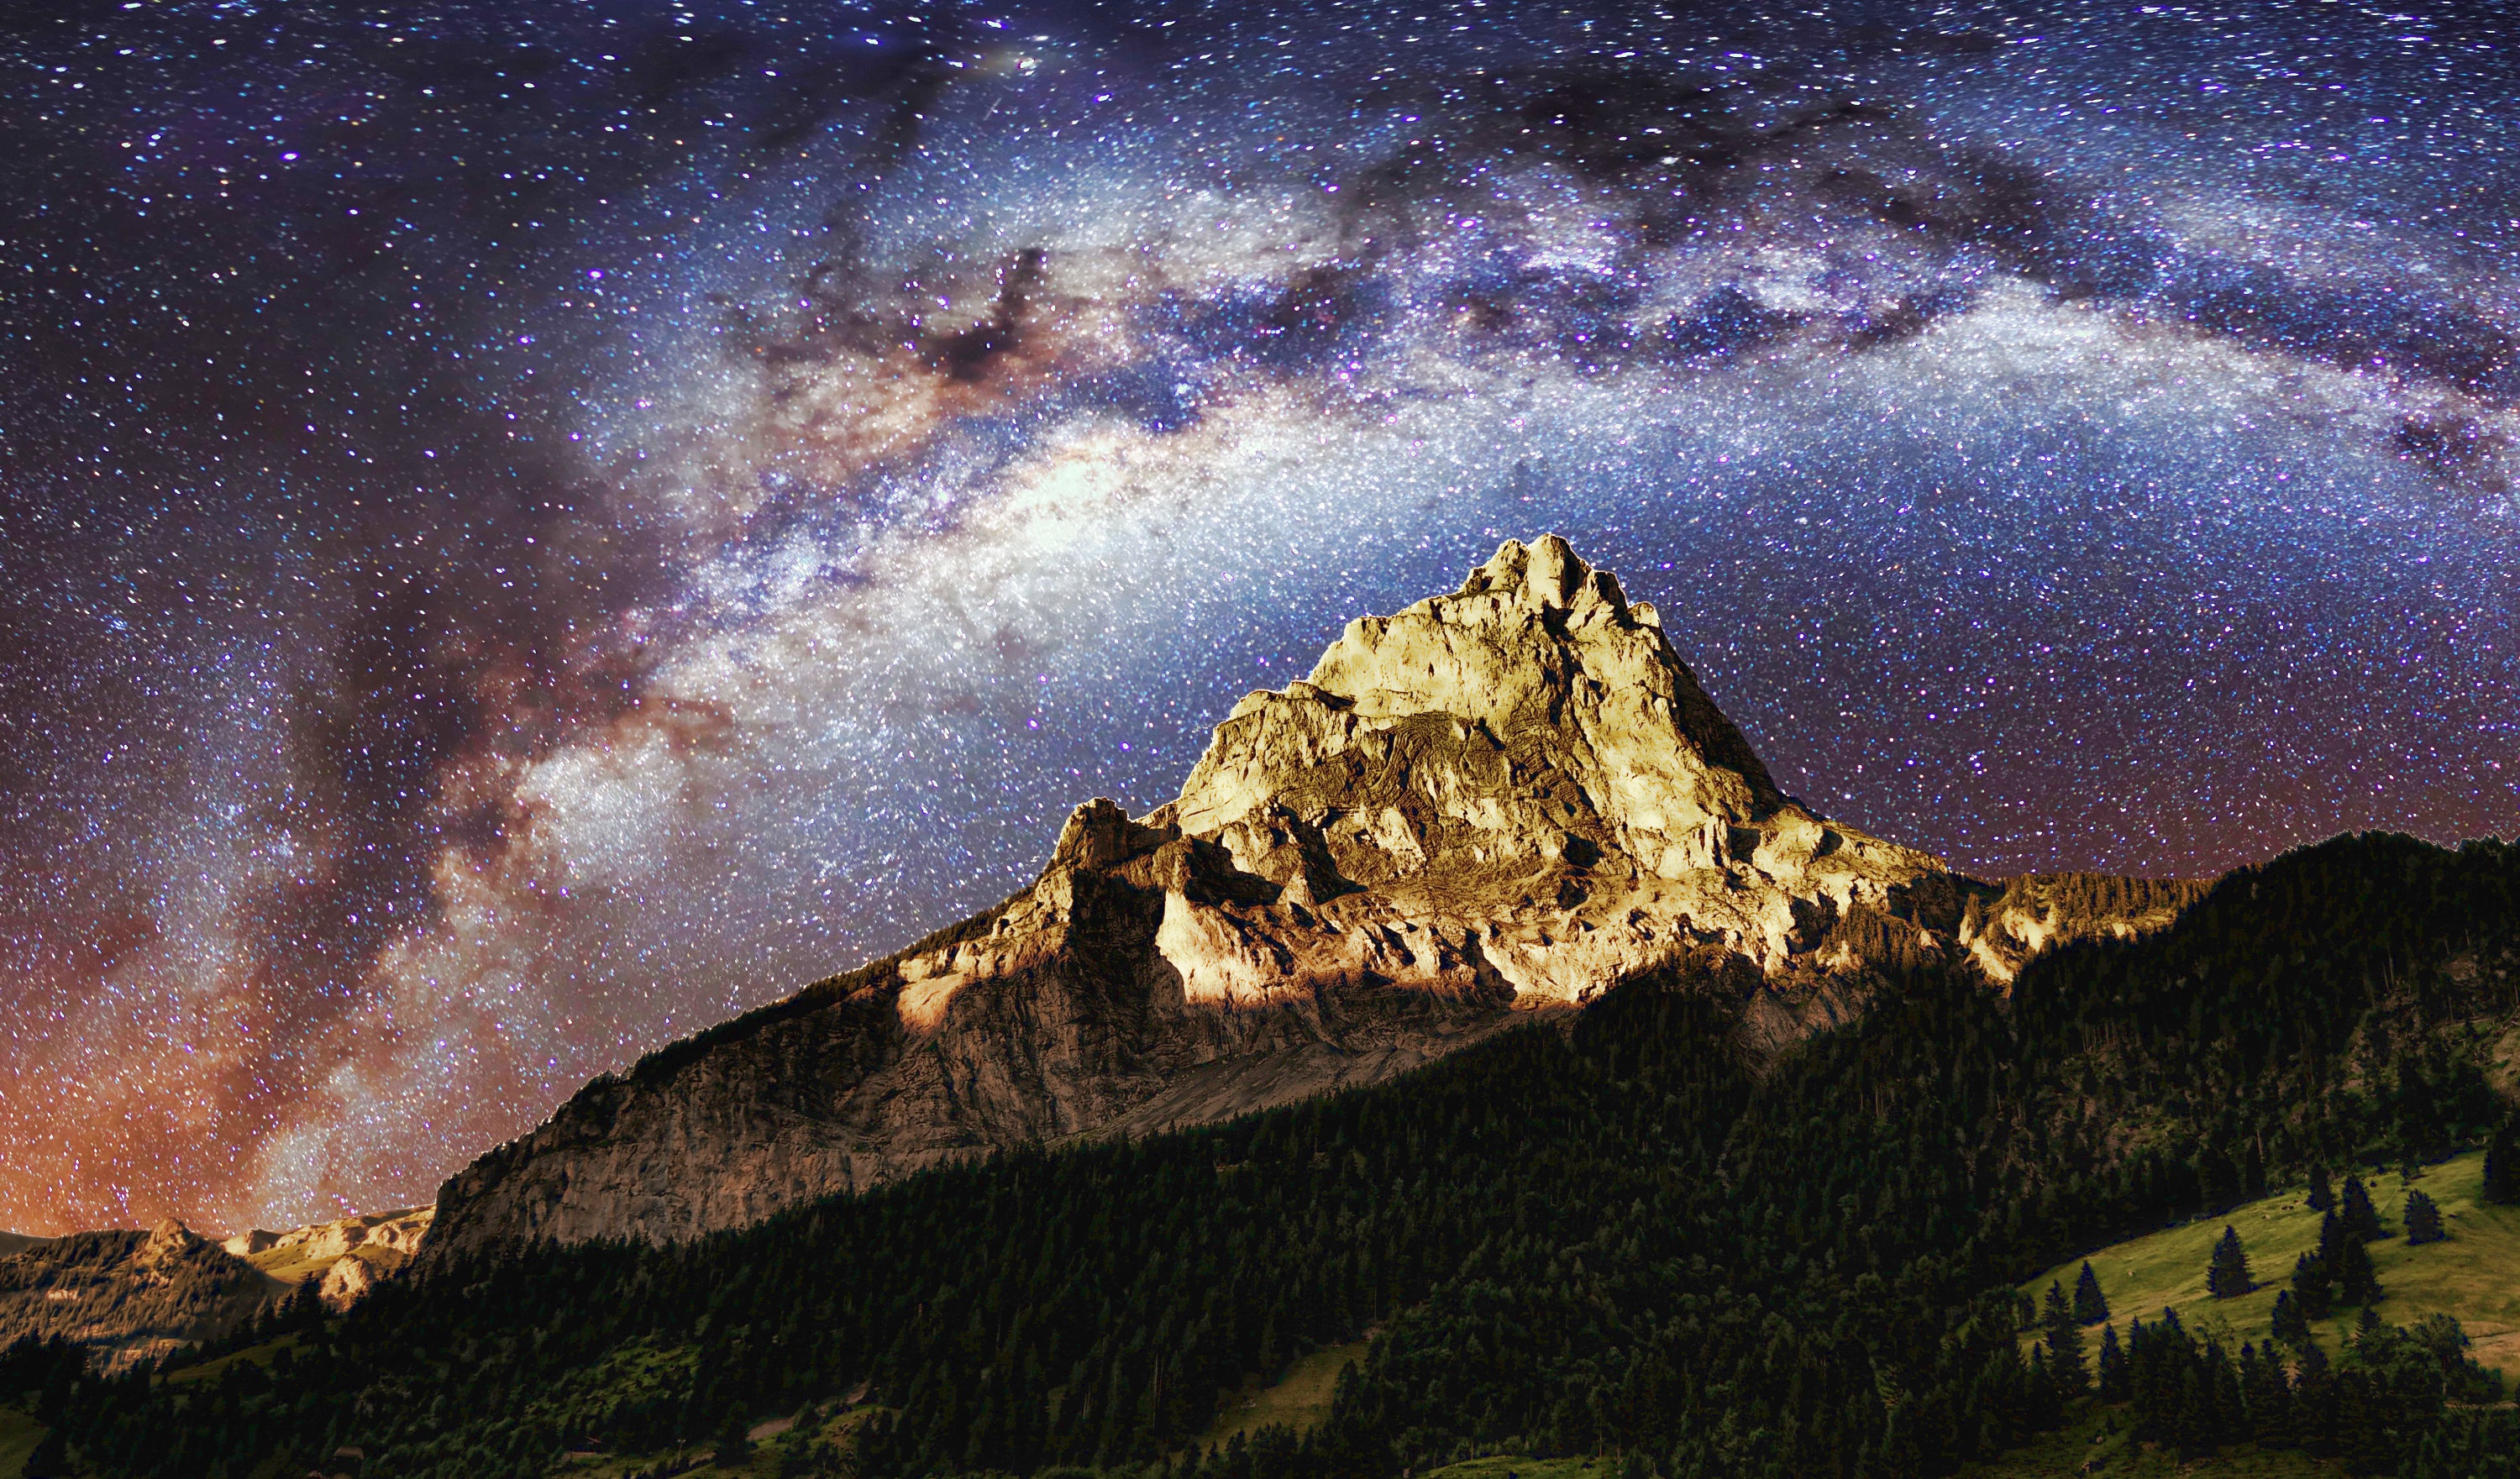 The Milky Way over the mountaintops